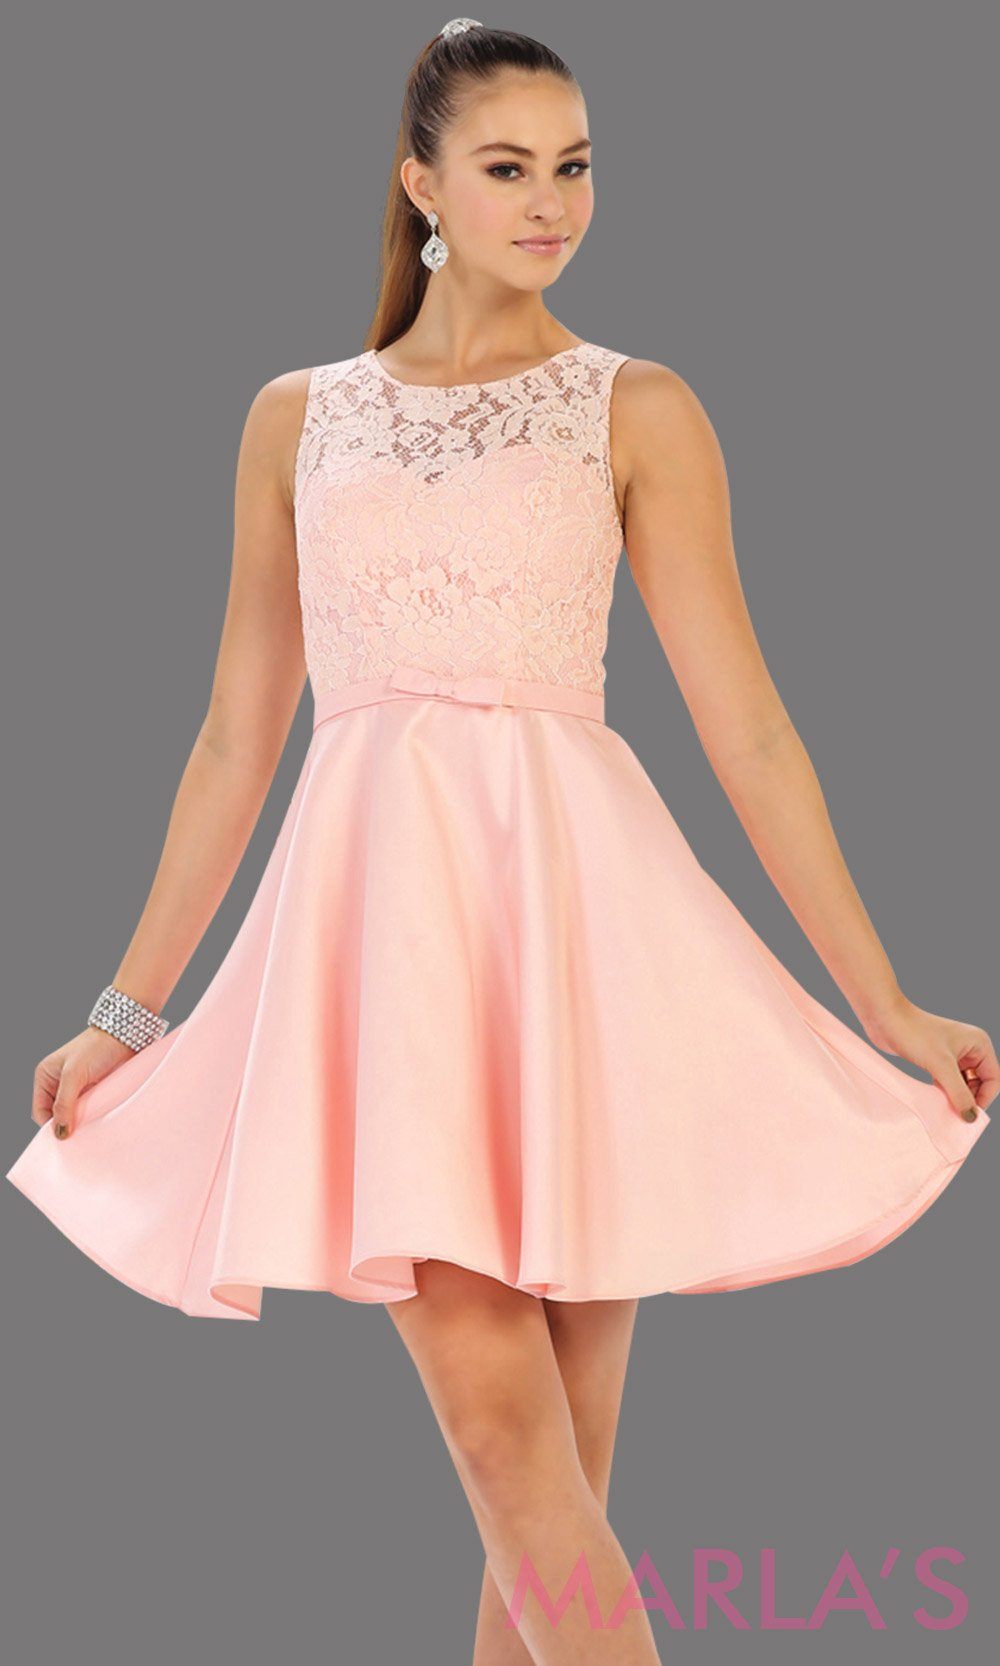 Short simple  semi formal blush pink dress with lace bodice and satin skirt. Light pink dress is perfect for grade 8 grad, graduation, short prom, damas quinceanera, confirmation. Available in plus sizes.grade 8 grad dresses, graduation dresses